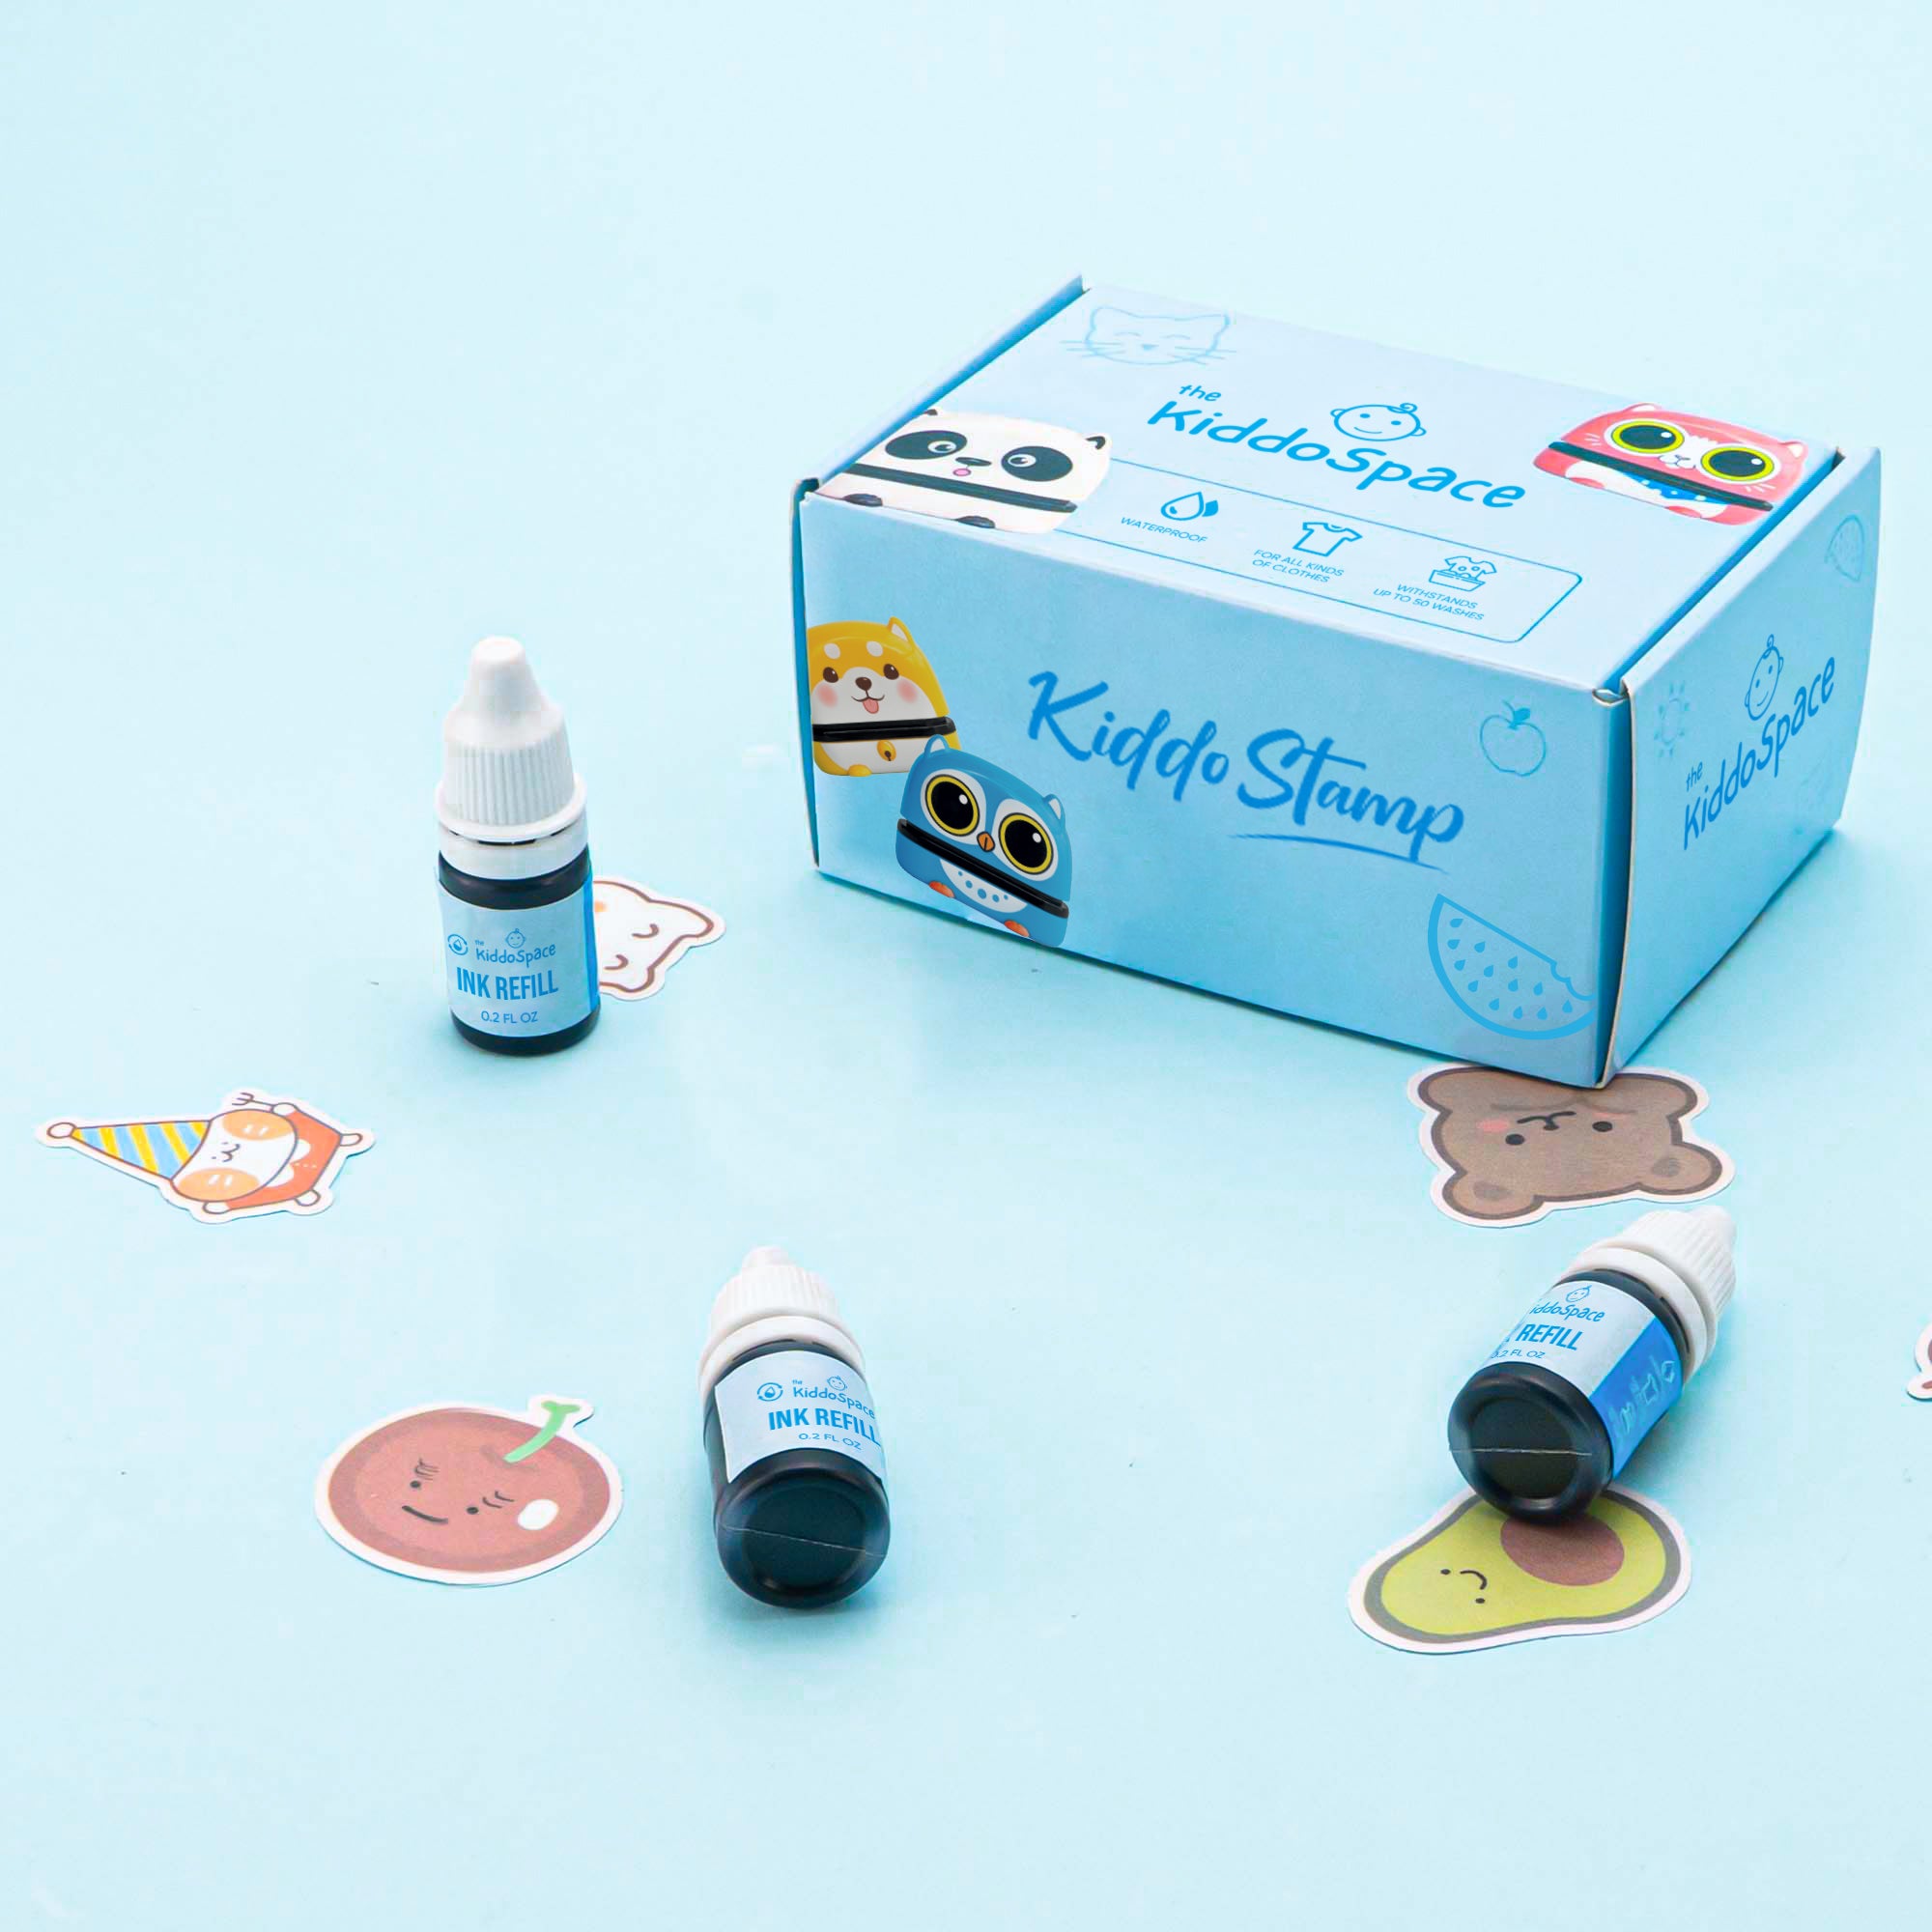 Refill ink for stamps (0.2 fl oz - 3 pieces)